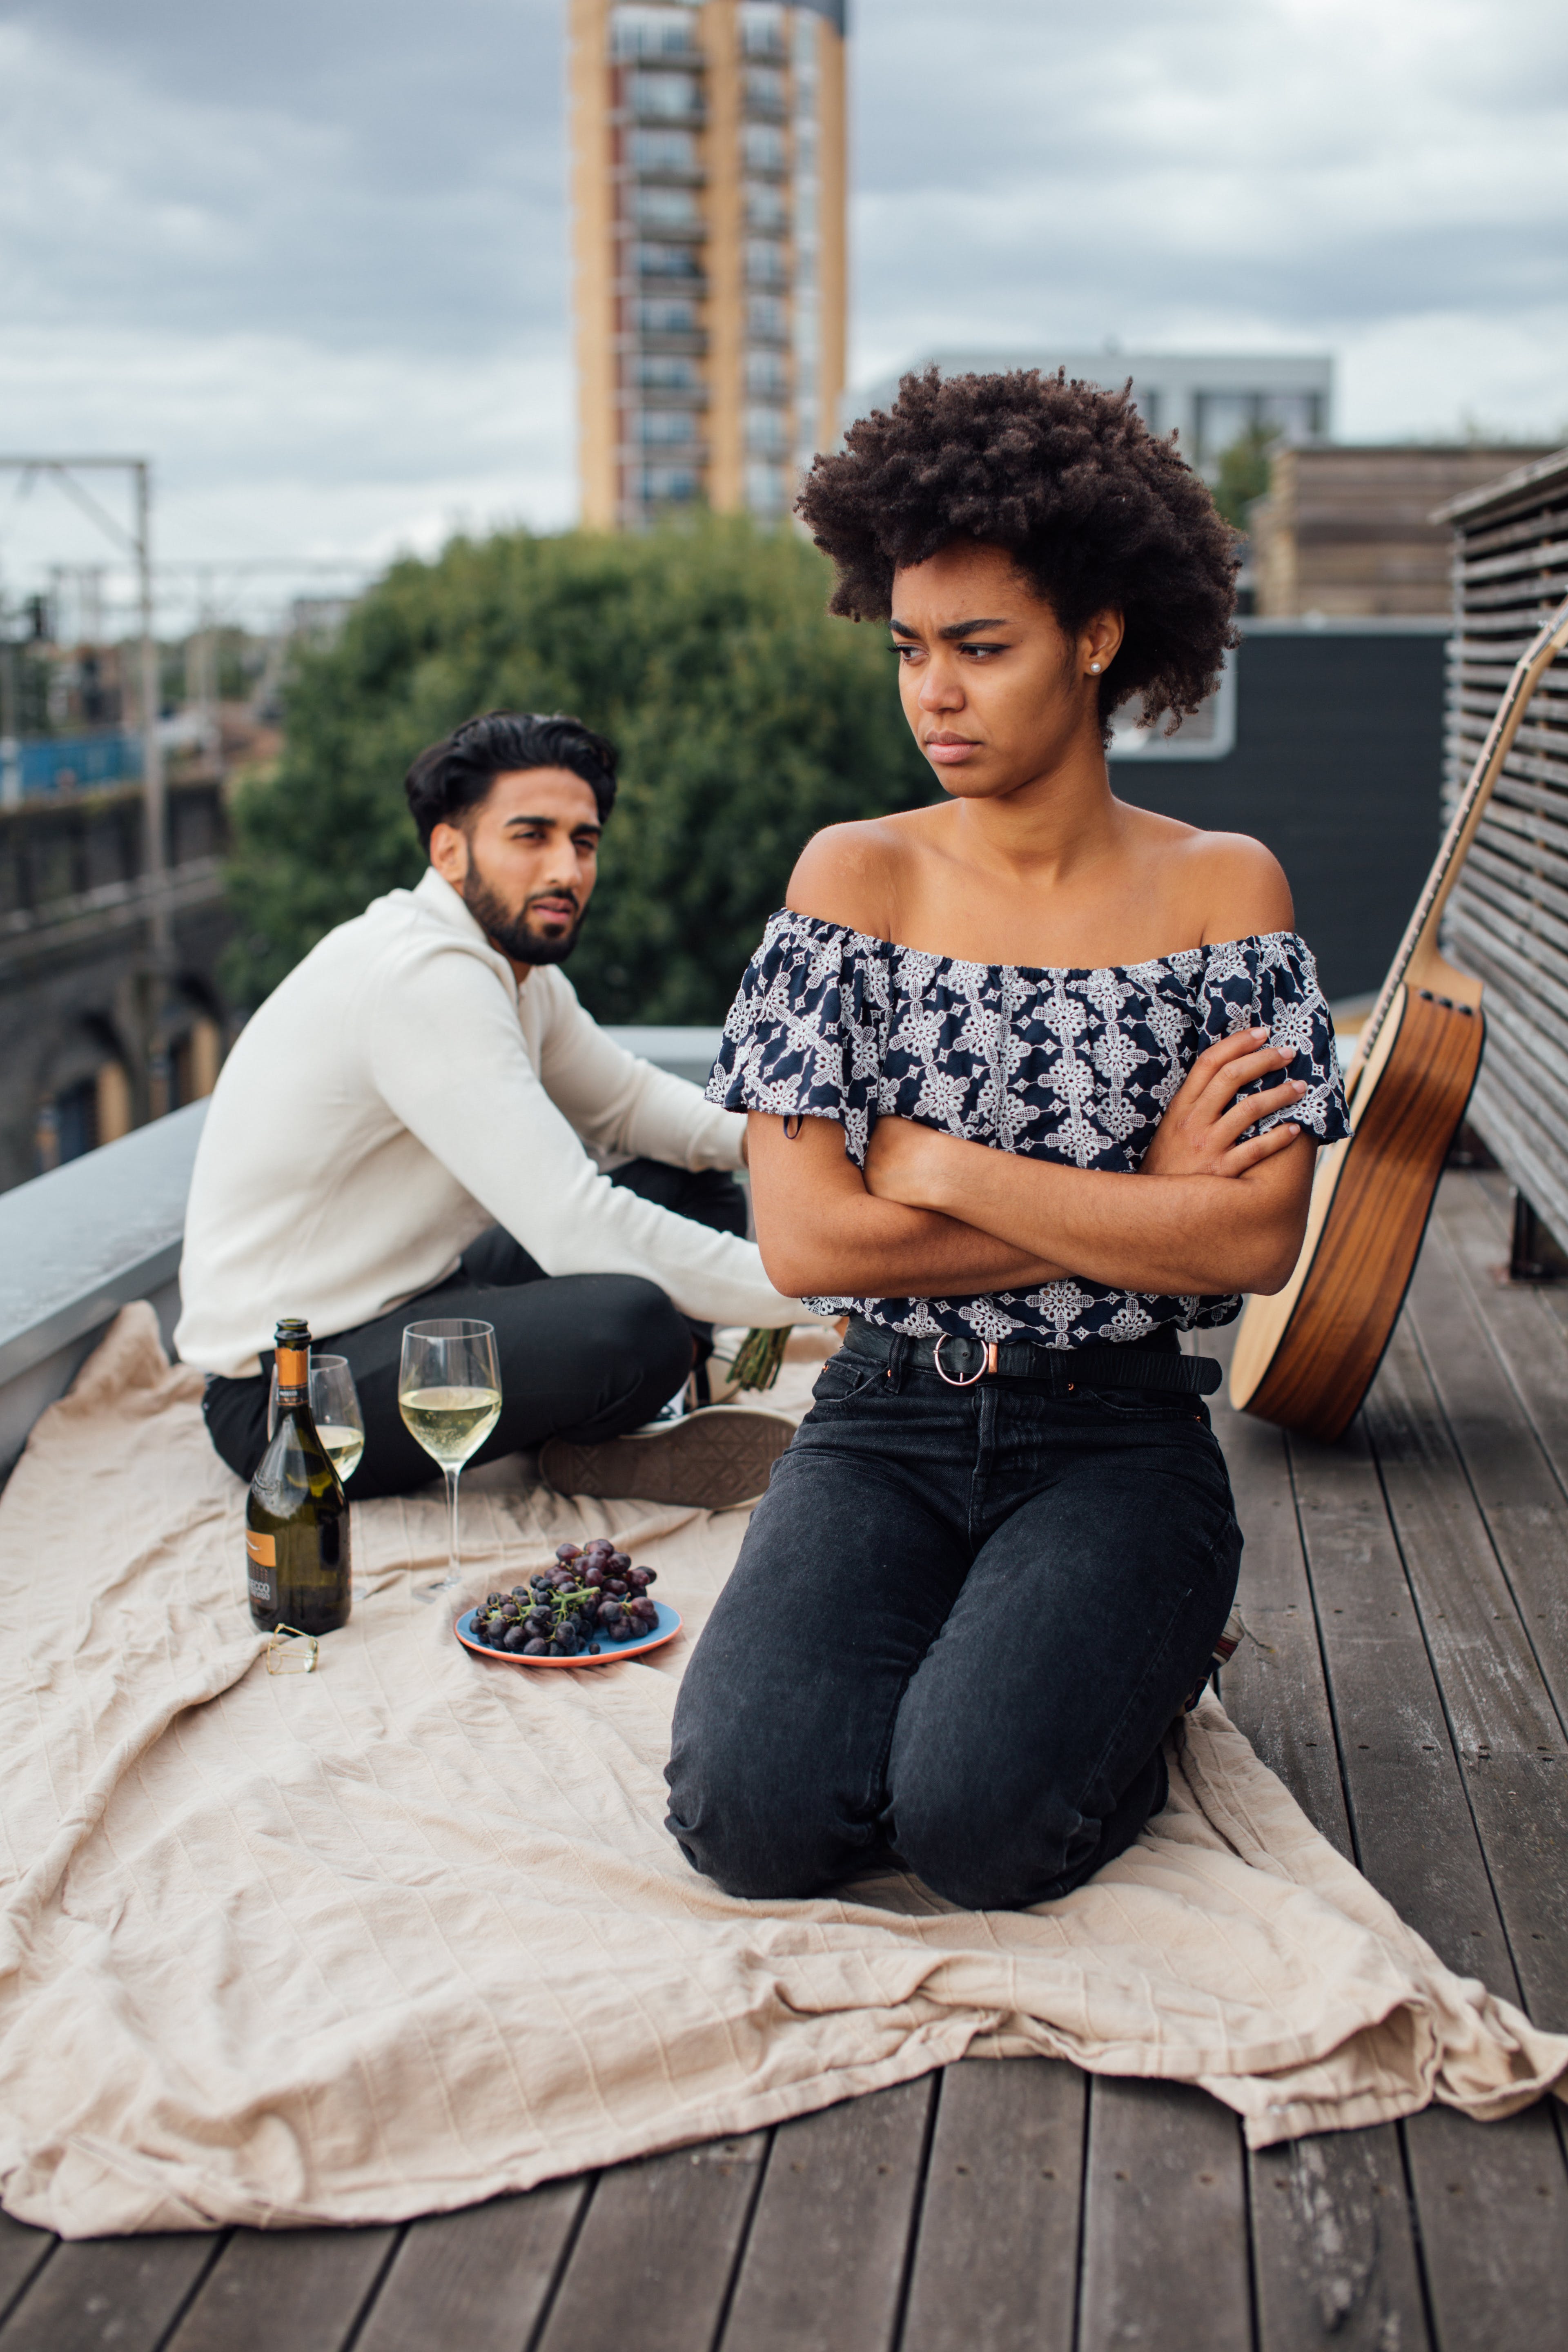 A biracial couple having a tense moment while enjoying while and grapes | Source: Pexels